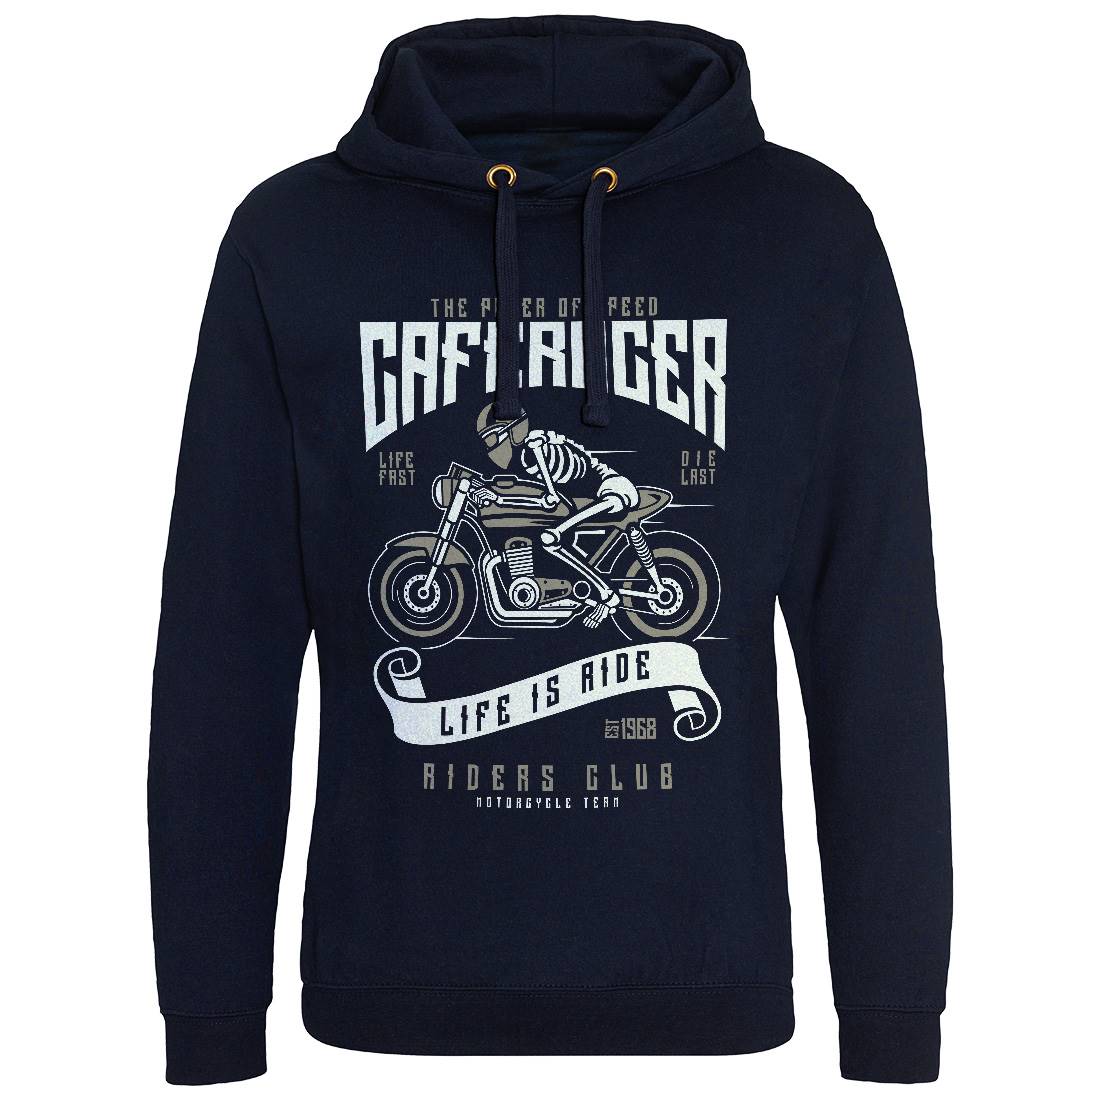 Speed Of Caferacer Mens Hoodie Without Pocket Motorcycles A154